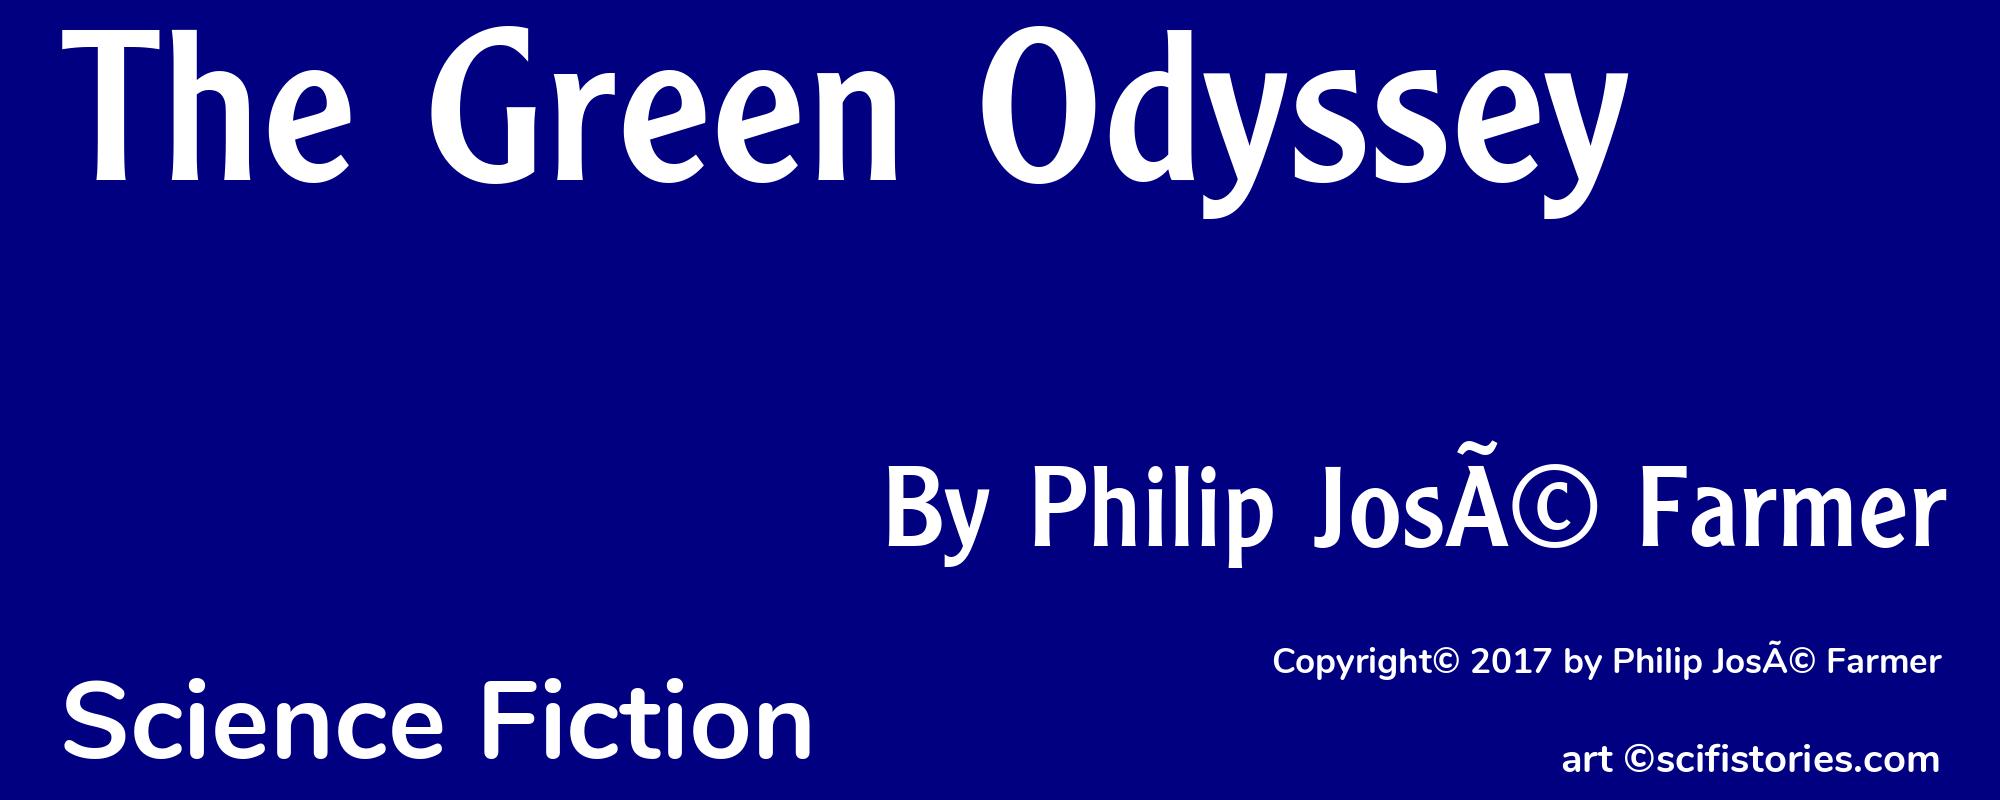 The Green Odyssey - Cover